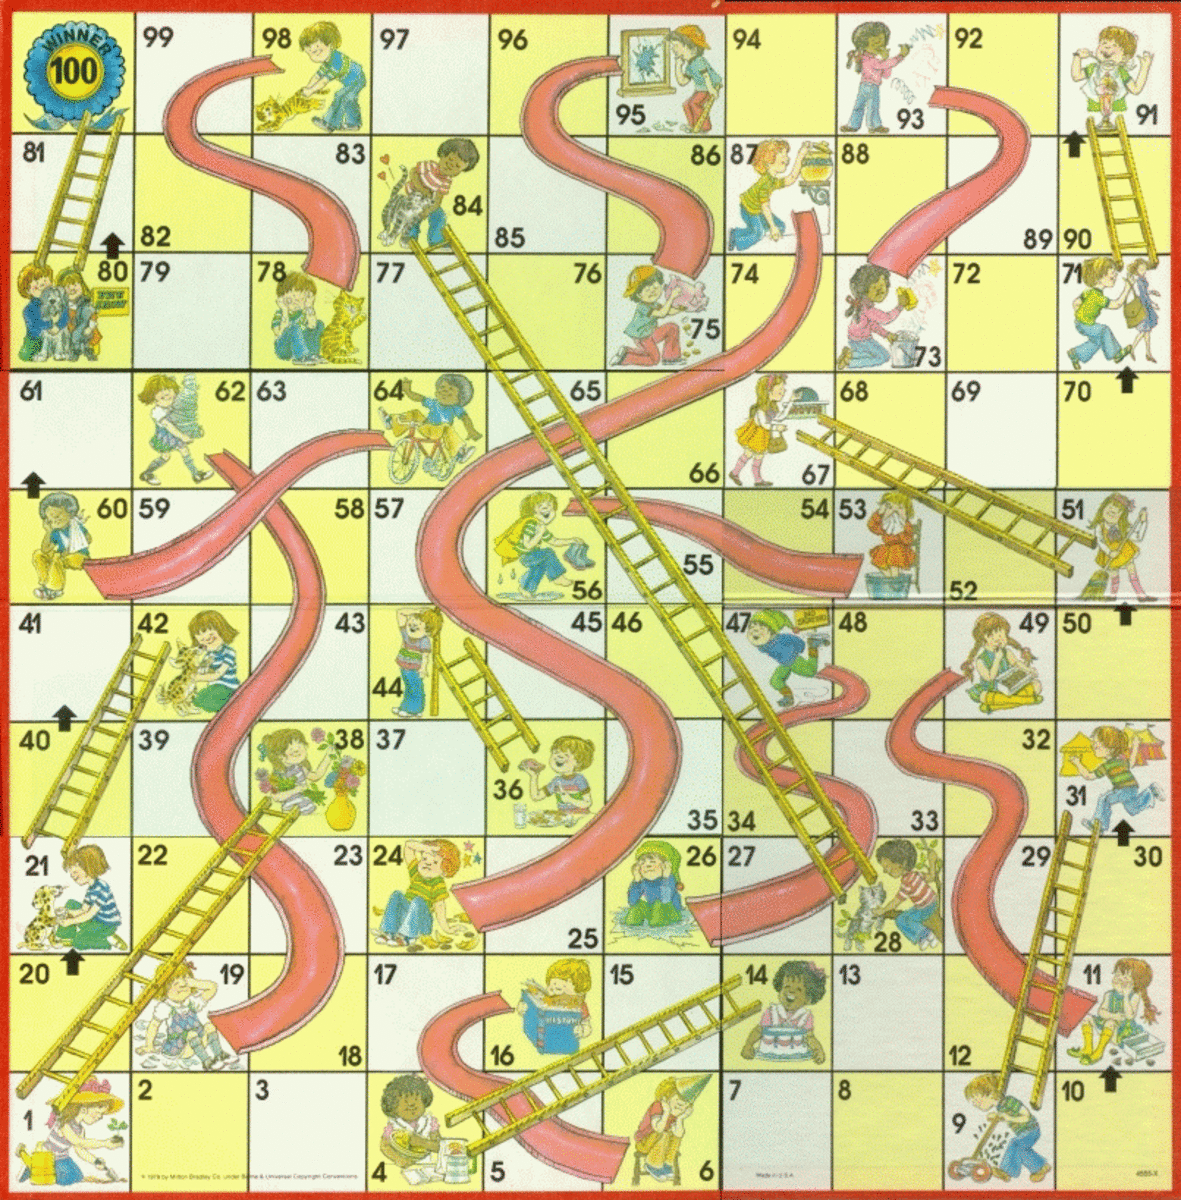 This older version of the Milton Bradley version of chutes and ladders shows a board with numbered game spaces. 